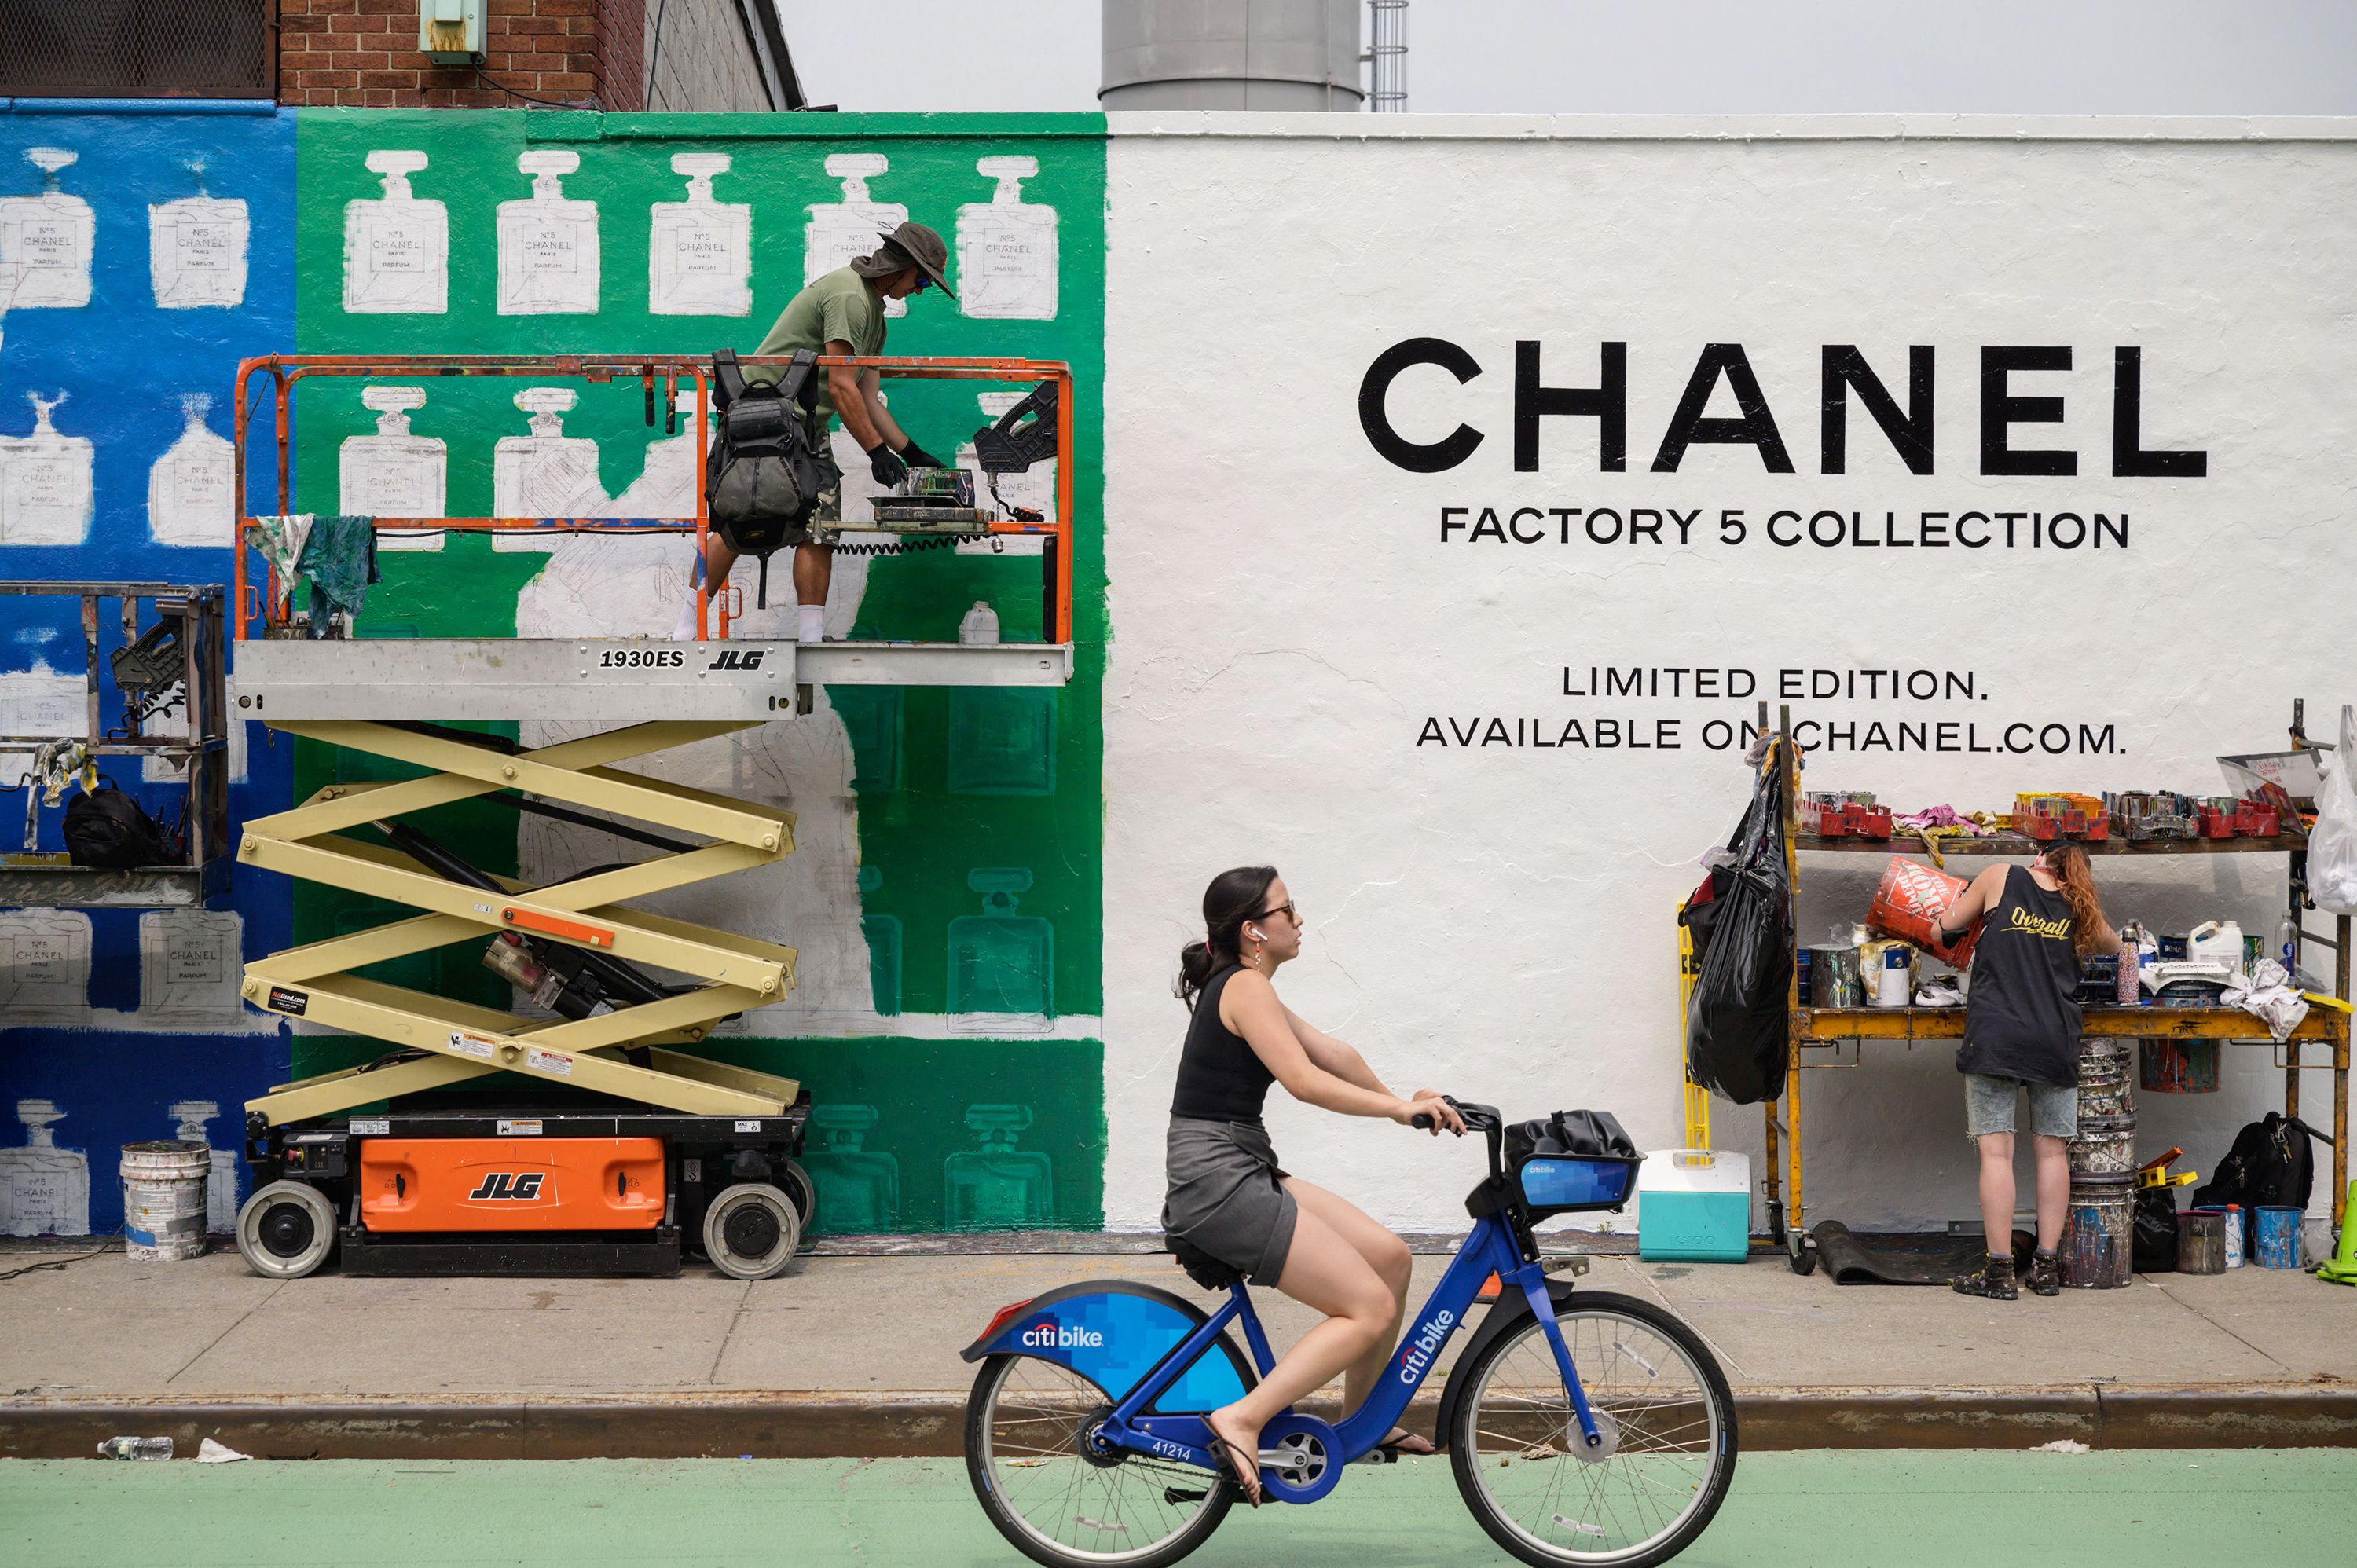 Chanel Beauty Store Opens in Williamsburg